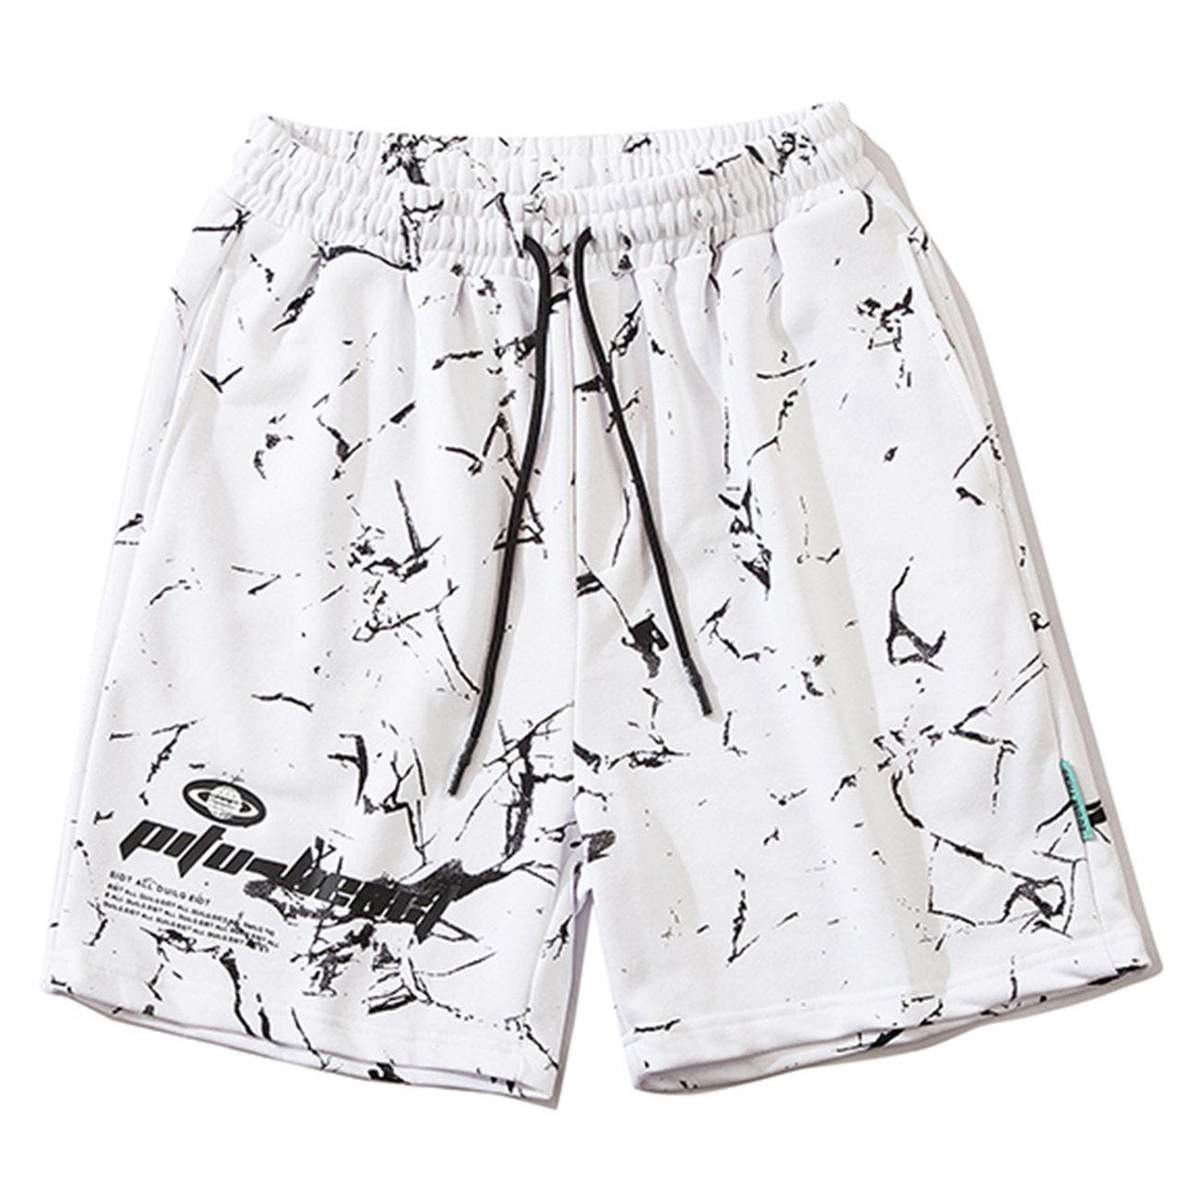 WLS Ink Letter Printed Saturn Sports Soft Cotton Shorts